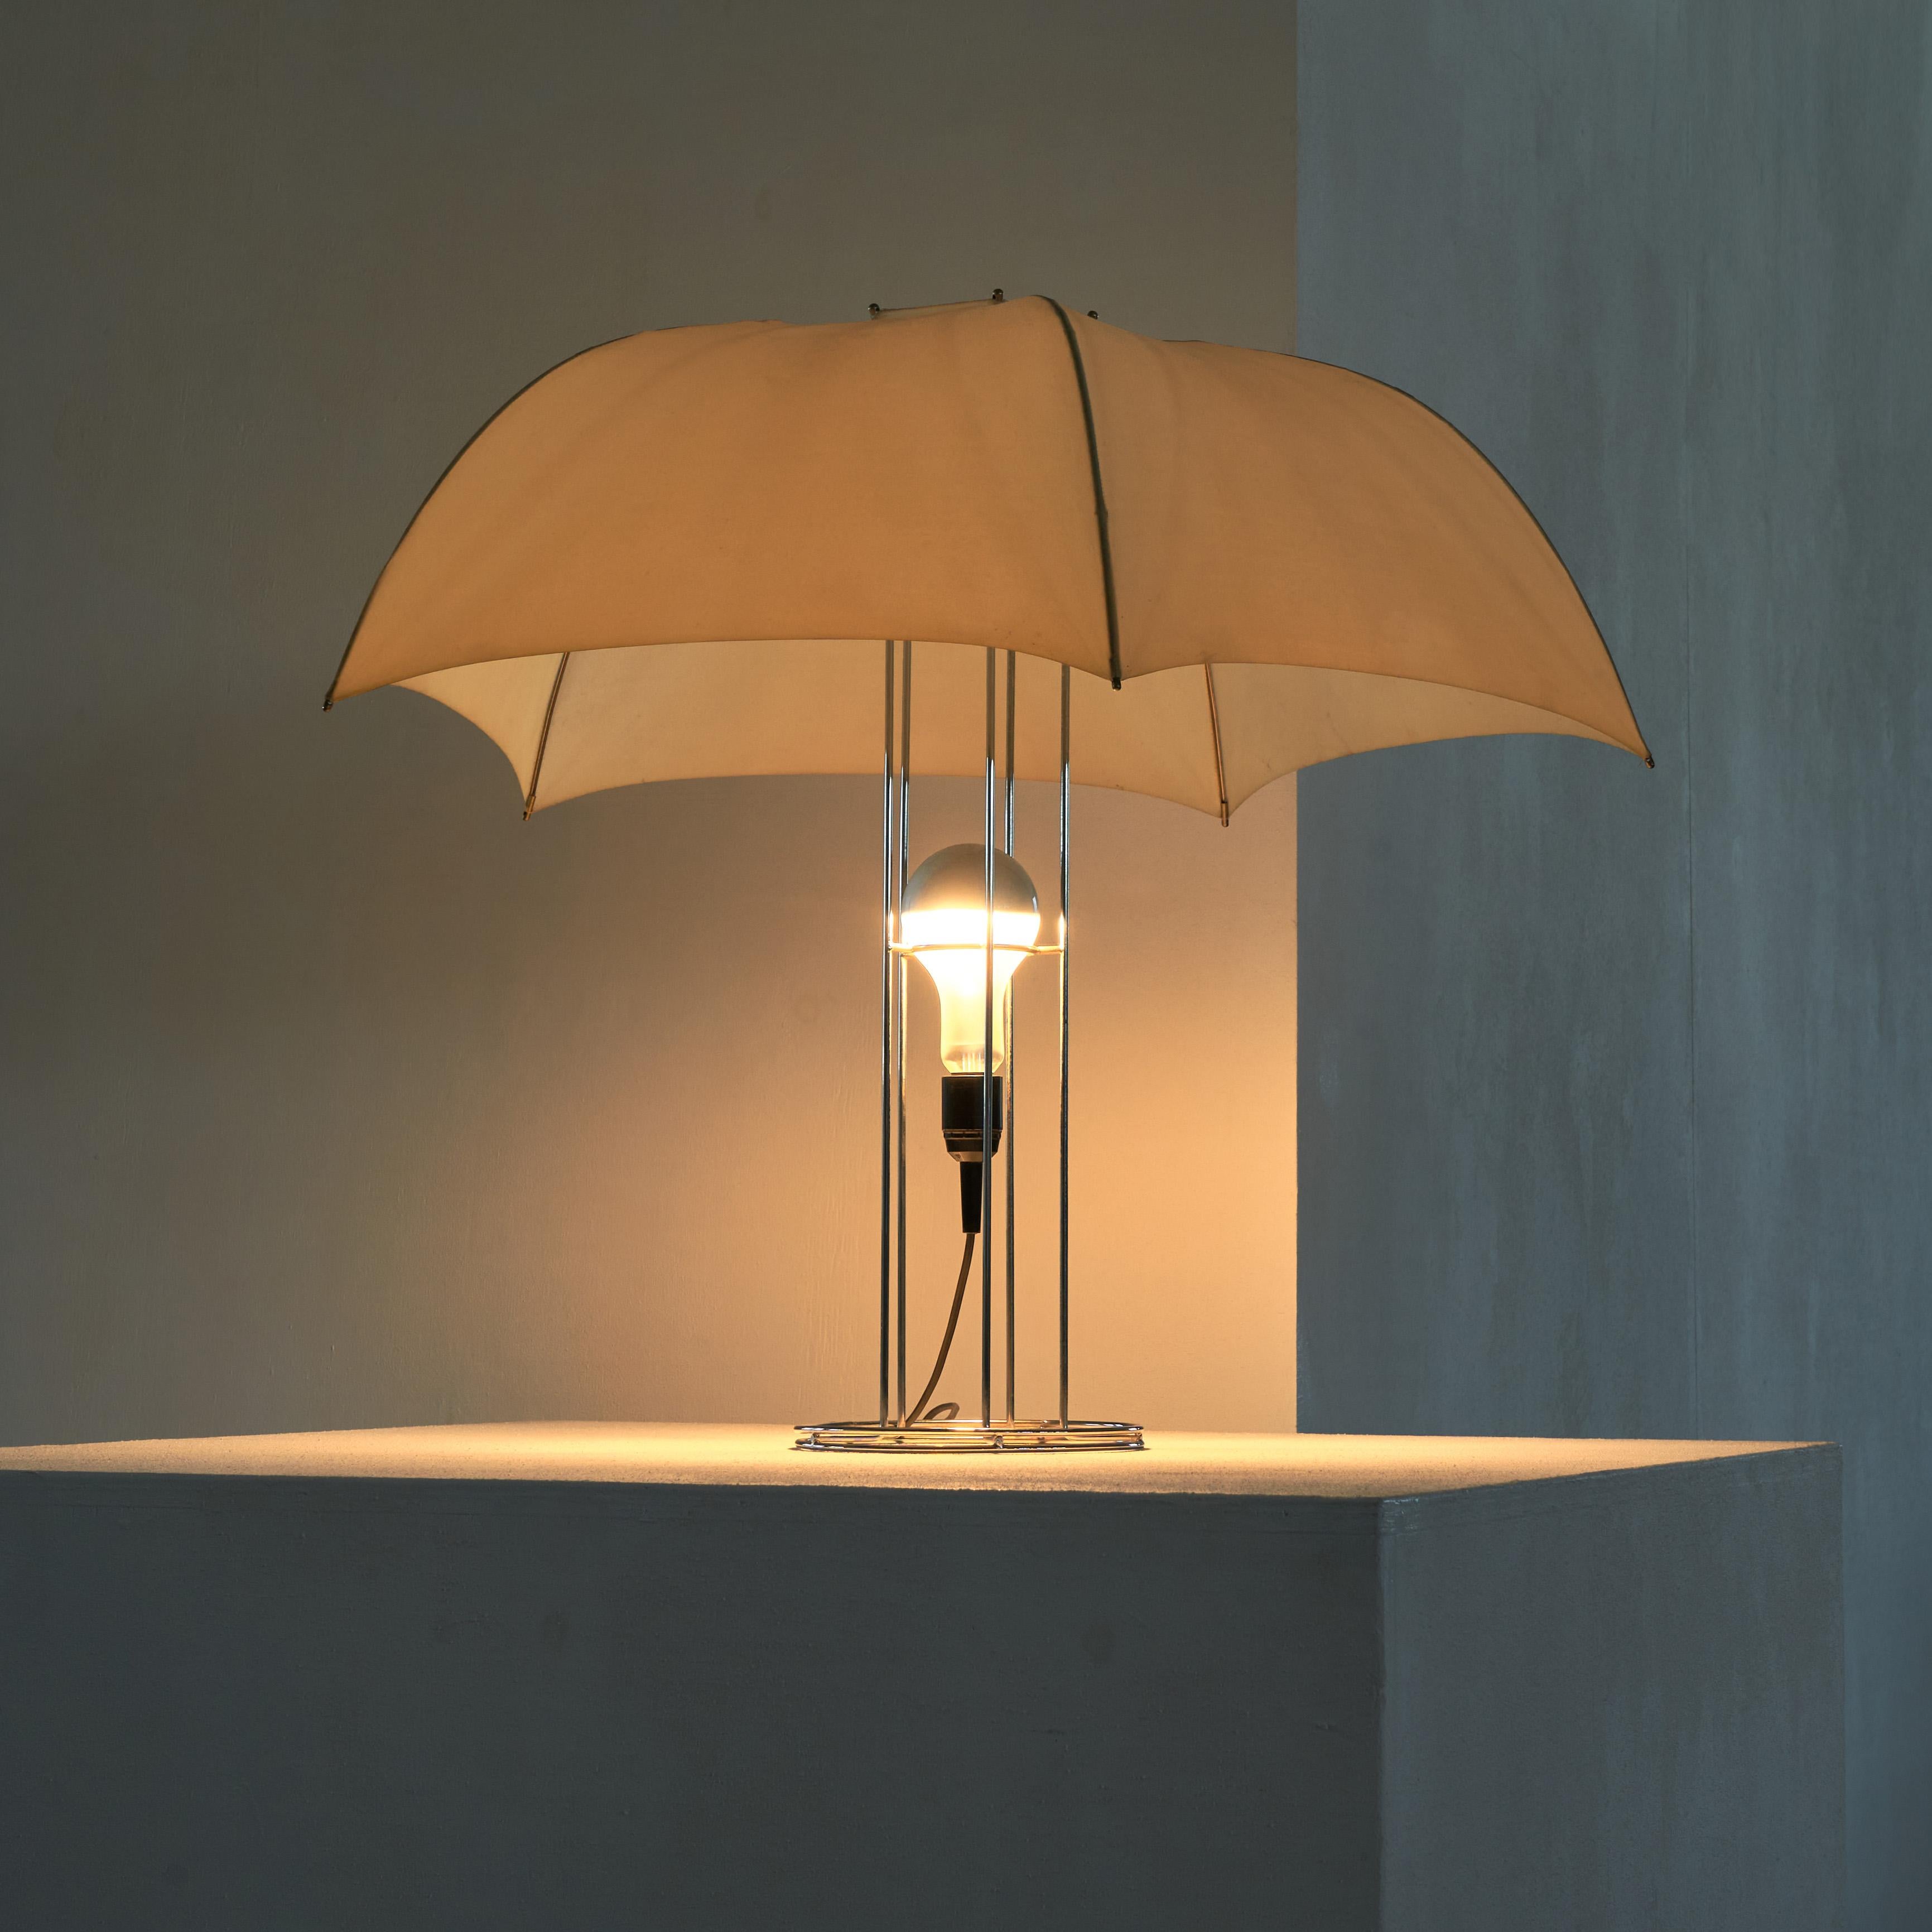 Gijs Bakker umbrella table lamp for Artimeta, The Netherlands 1973.

This is one of the most iconic pieces by Dutch furniture and jewelry designer Gijs Bakker (1942) for Artimeta. It is a fun and interesting piece which obviously makes a reference